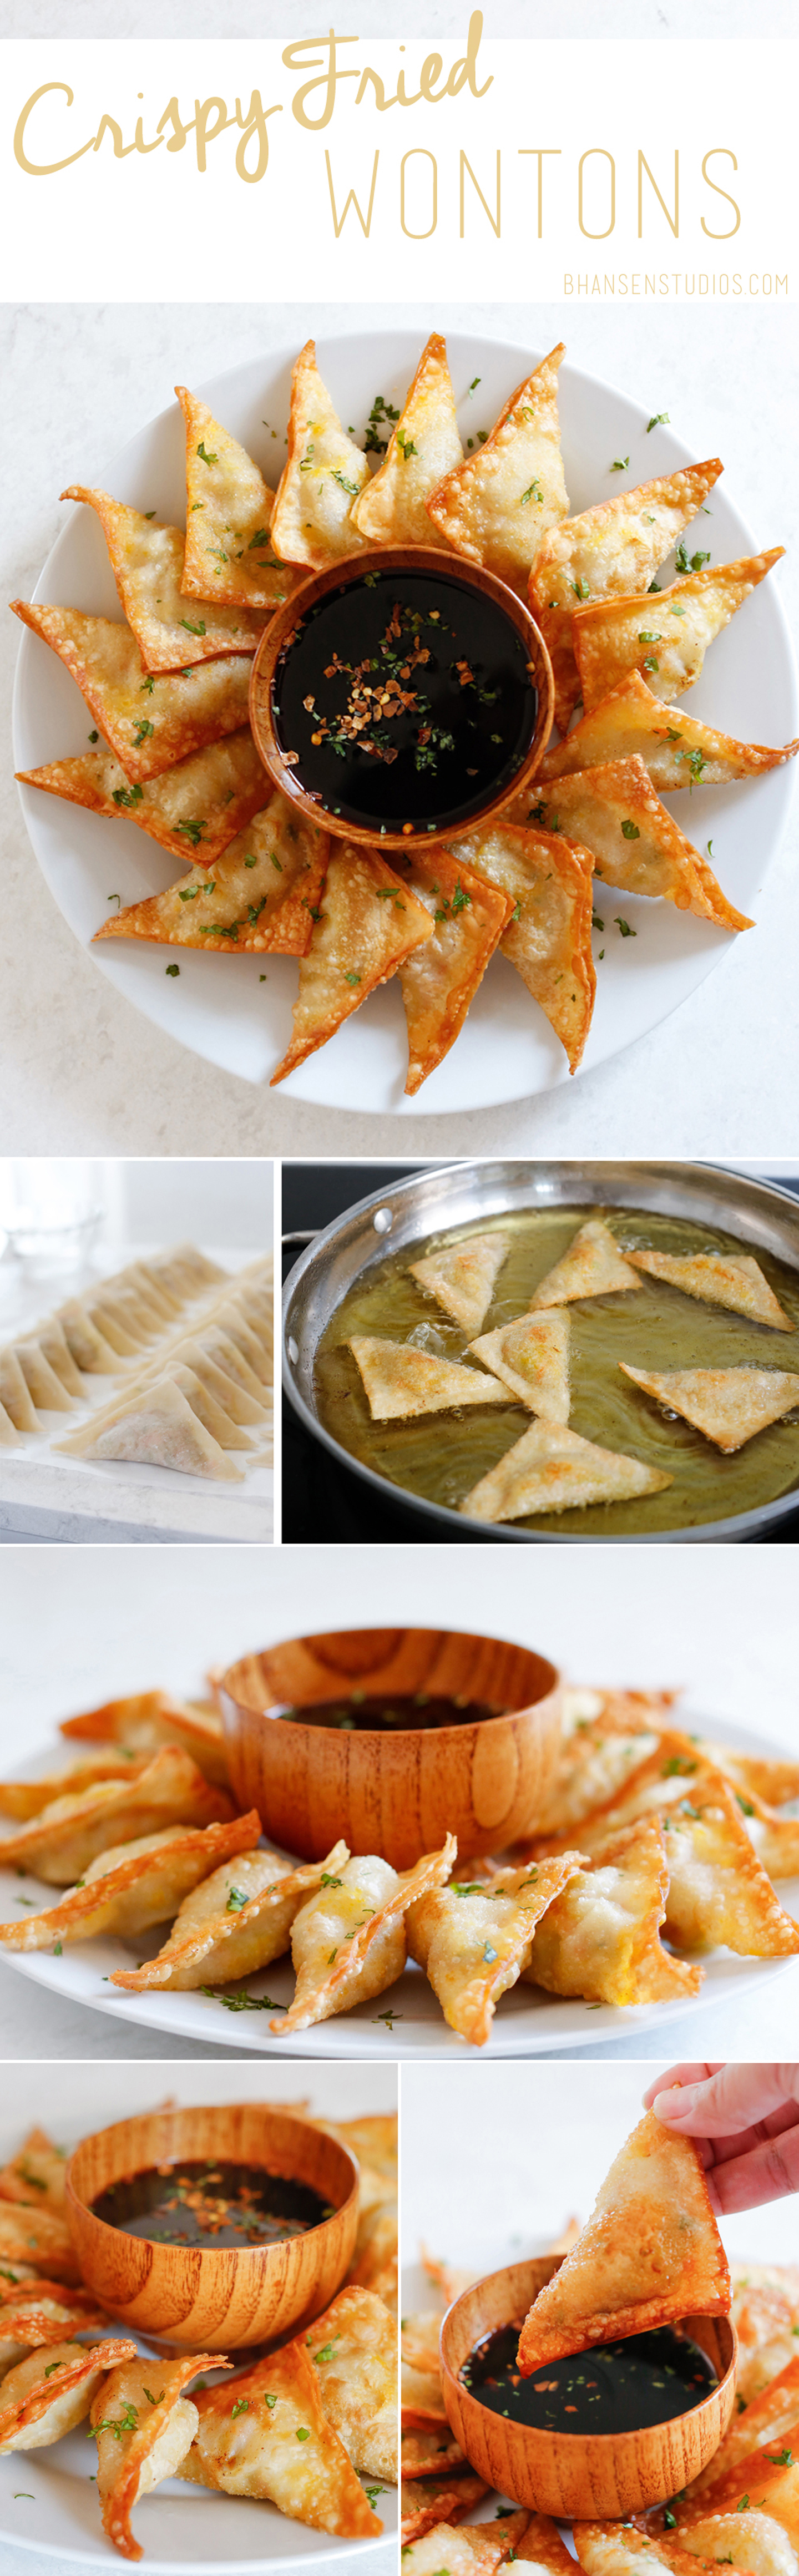 The tastiest homemade wontons and dipping sauce